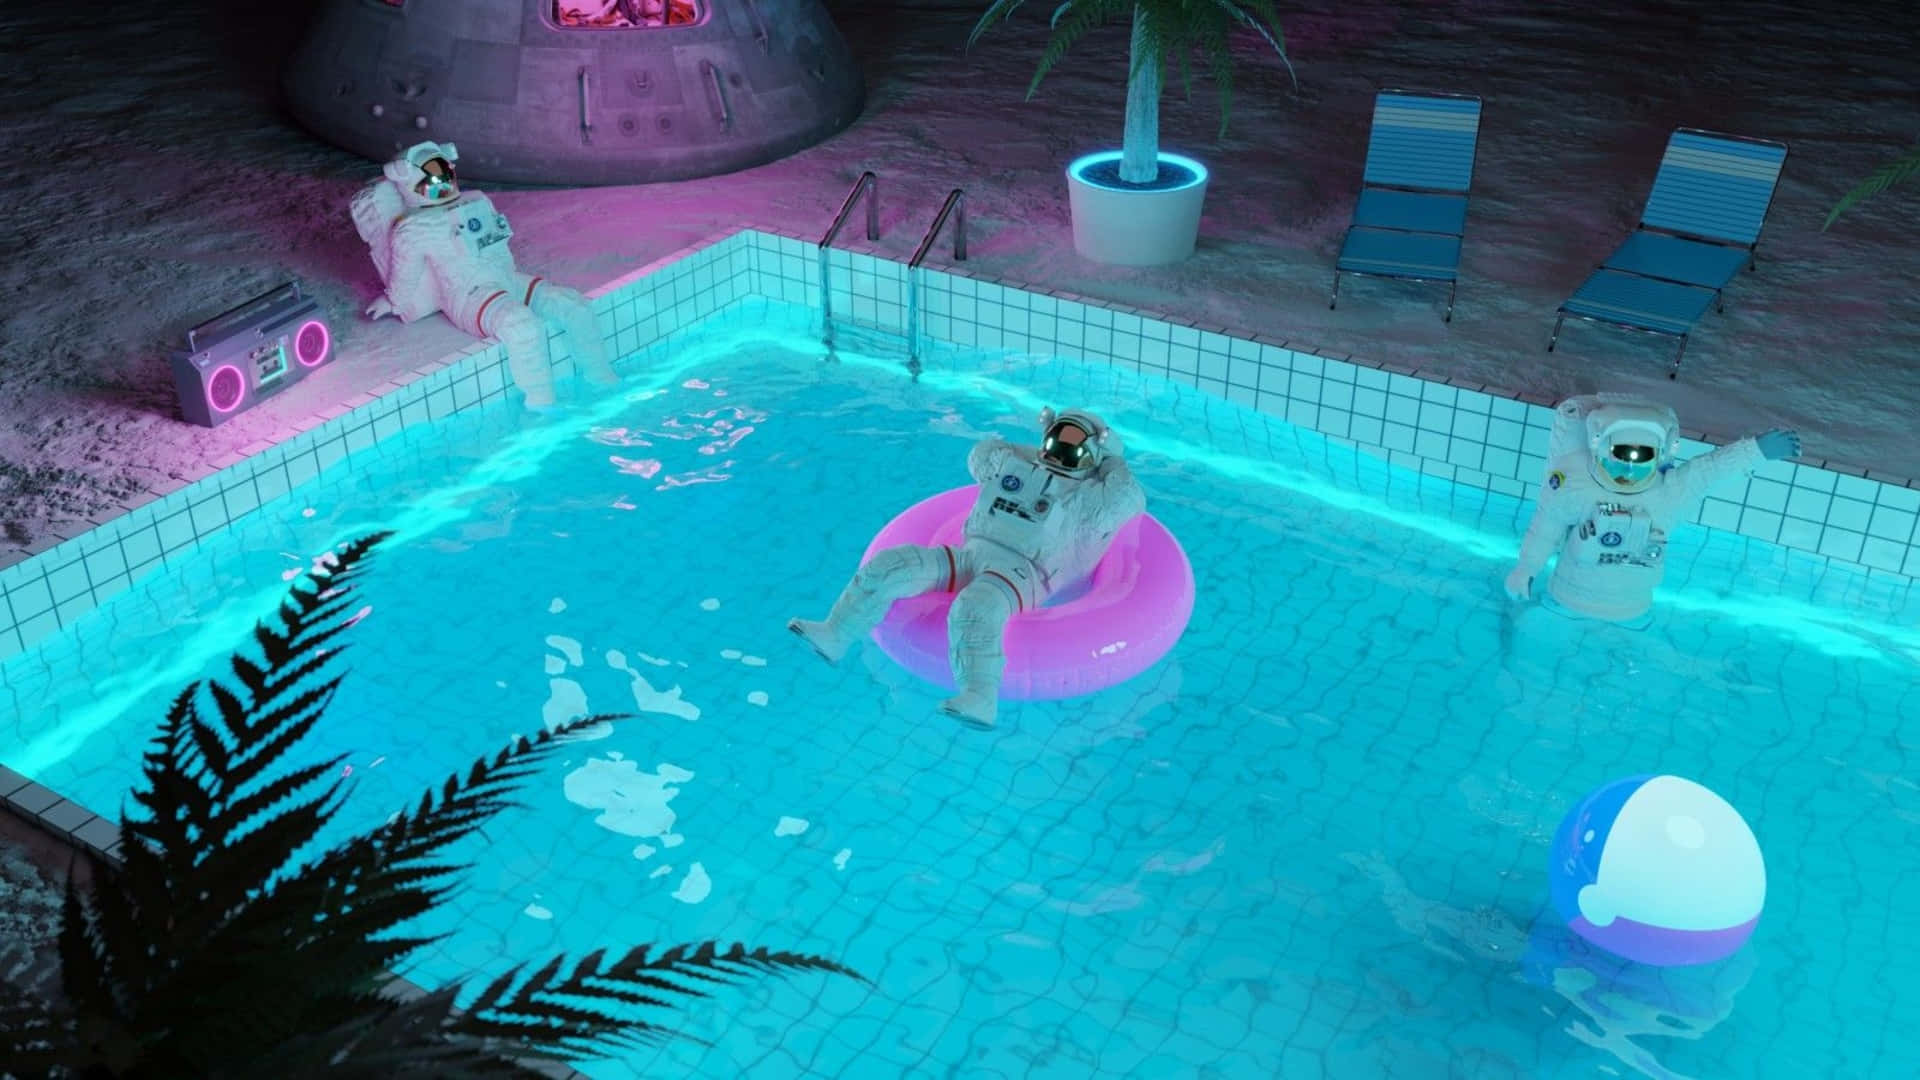 A Pool With People In Suits And A Neon Light